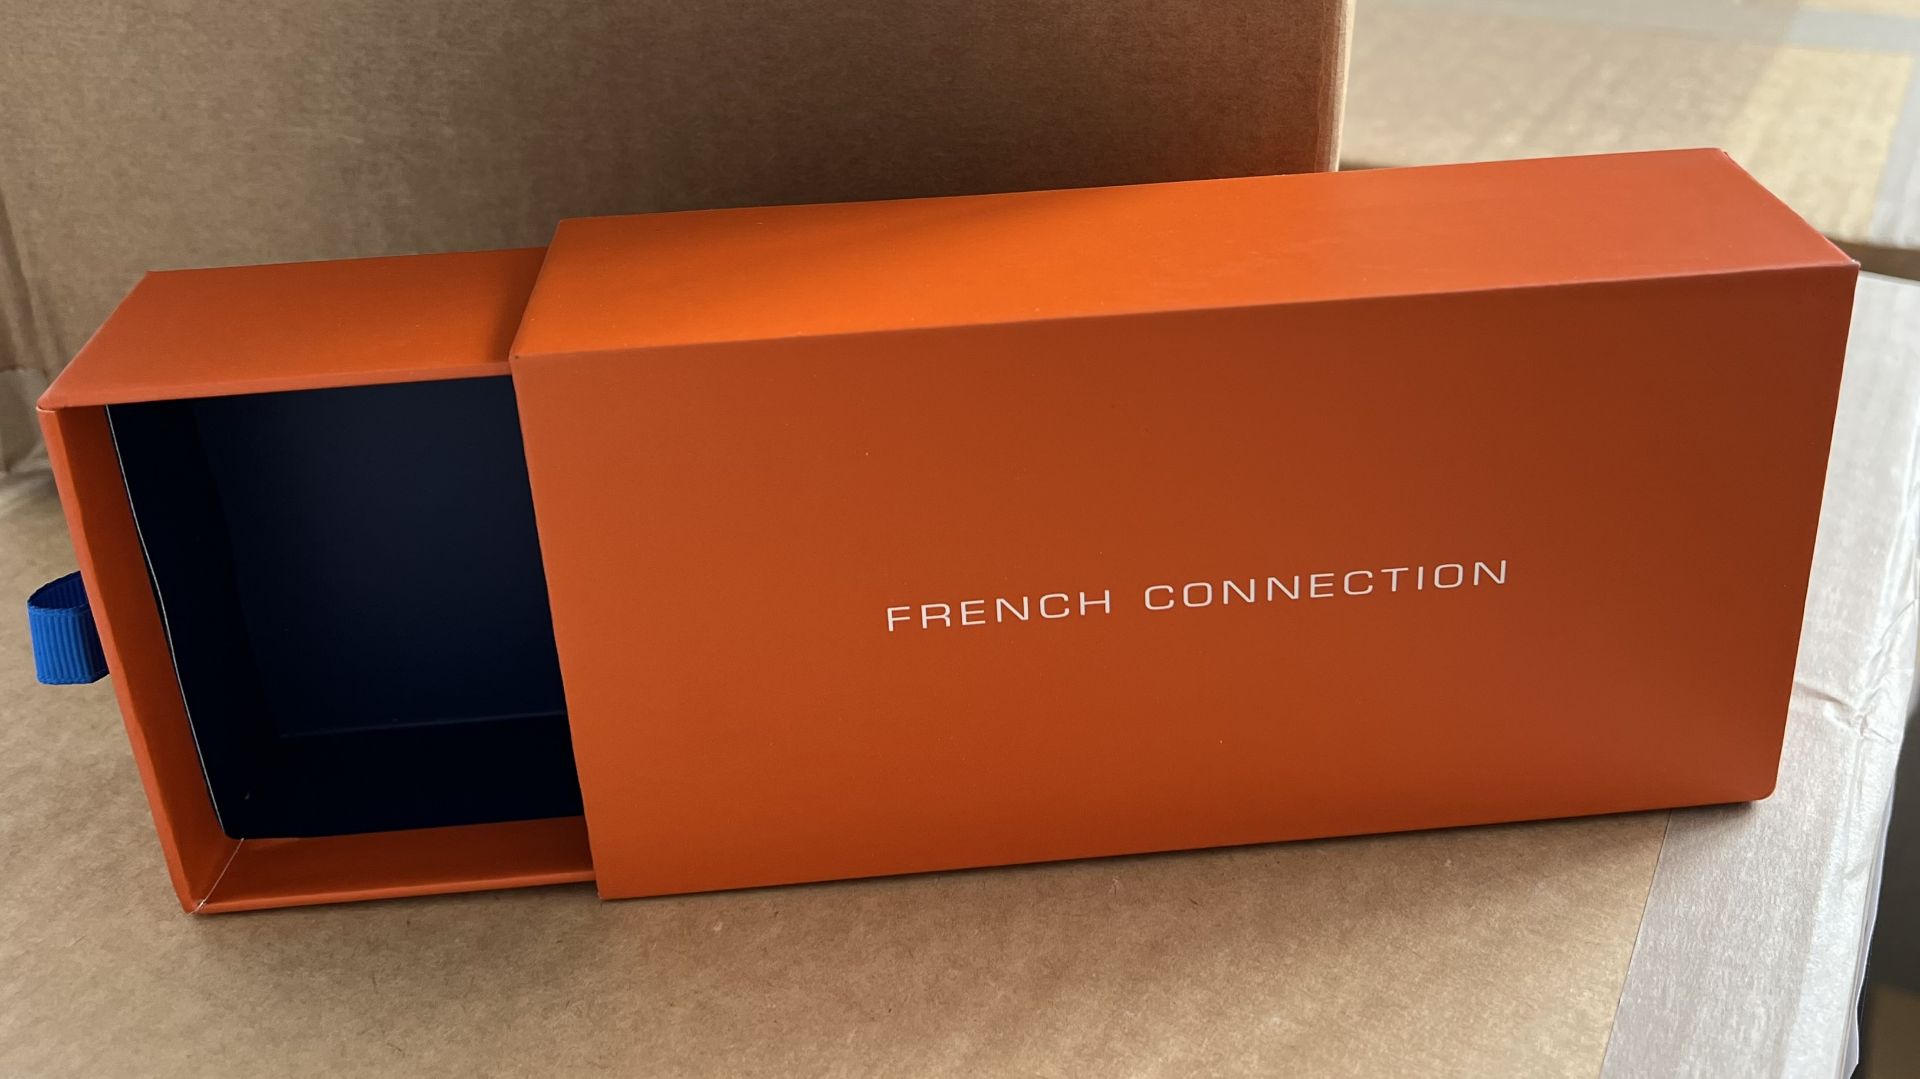 176 x French Connection Glasses / Sunglasses Orange Boxes - (NEW) - SELL FOR Â£880+ ! - Image 2 of 2